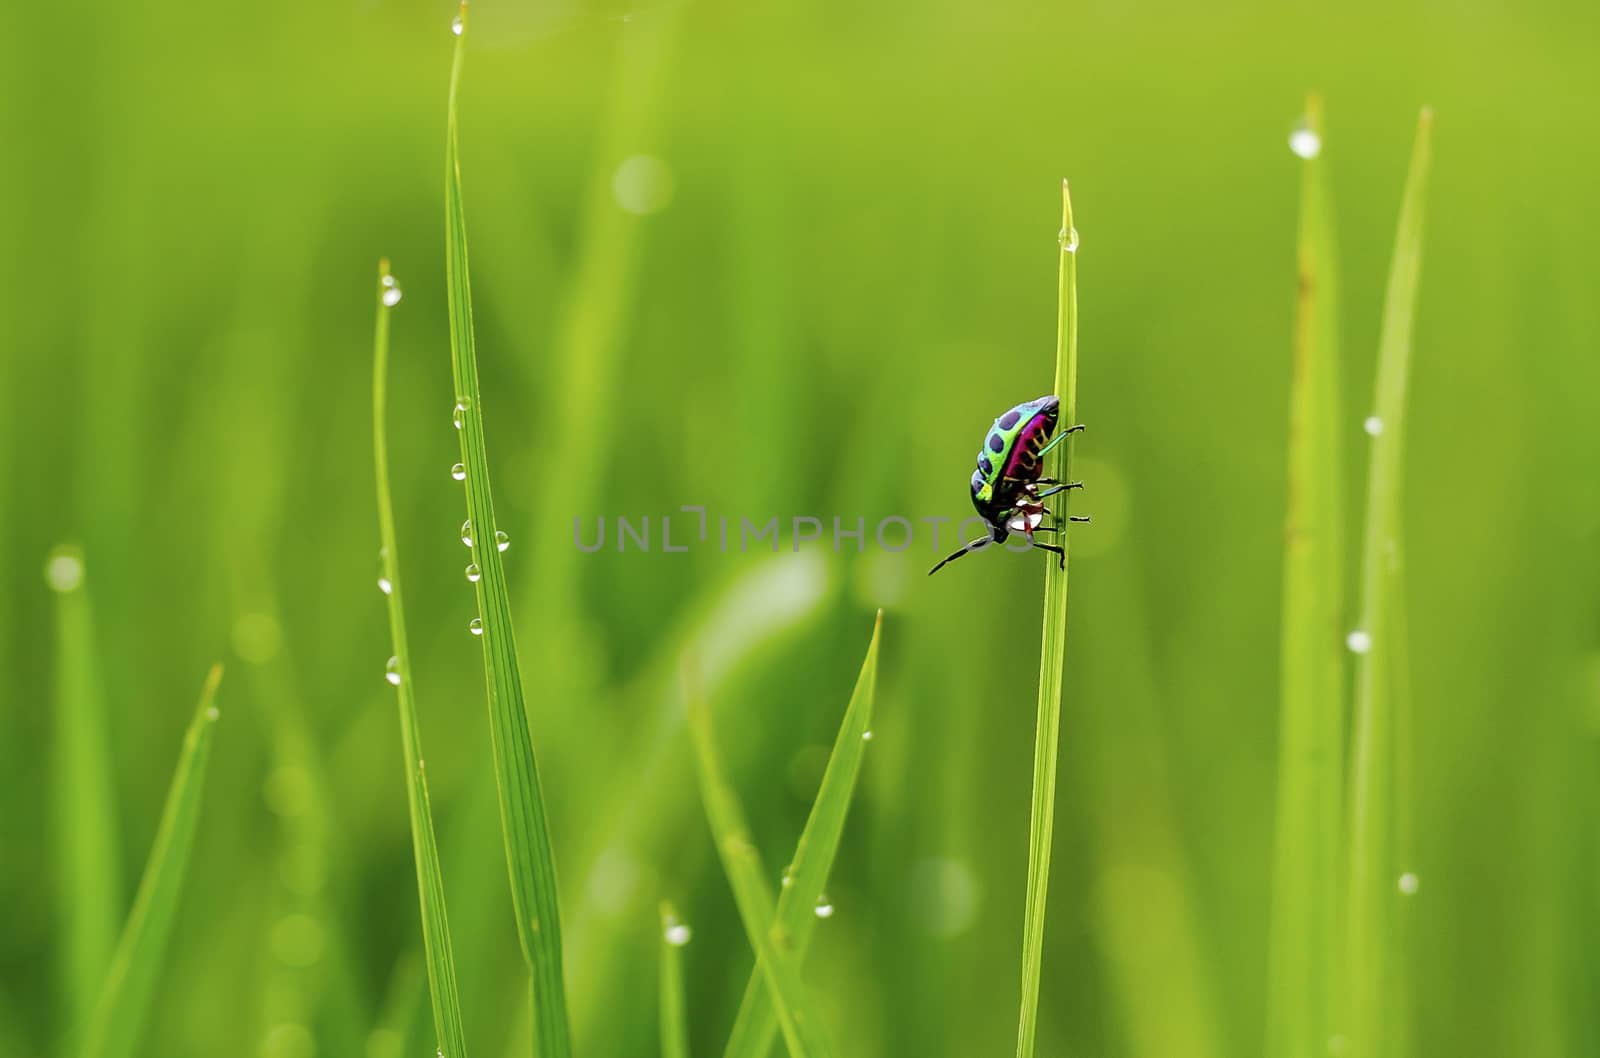 A color full insect on grass after rain